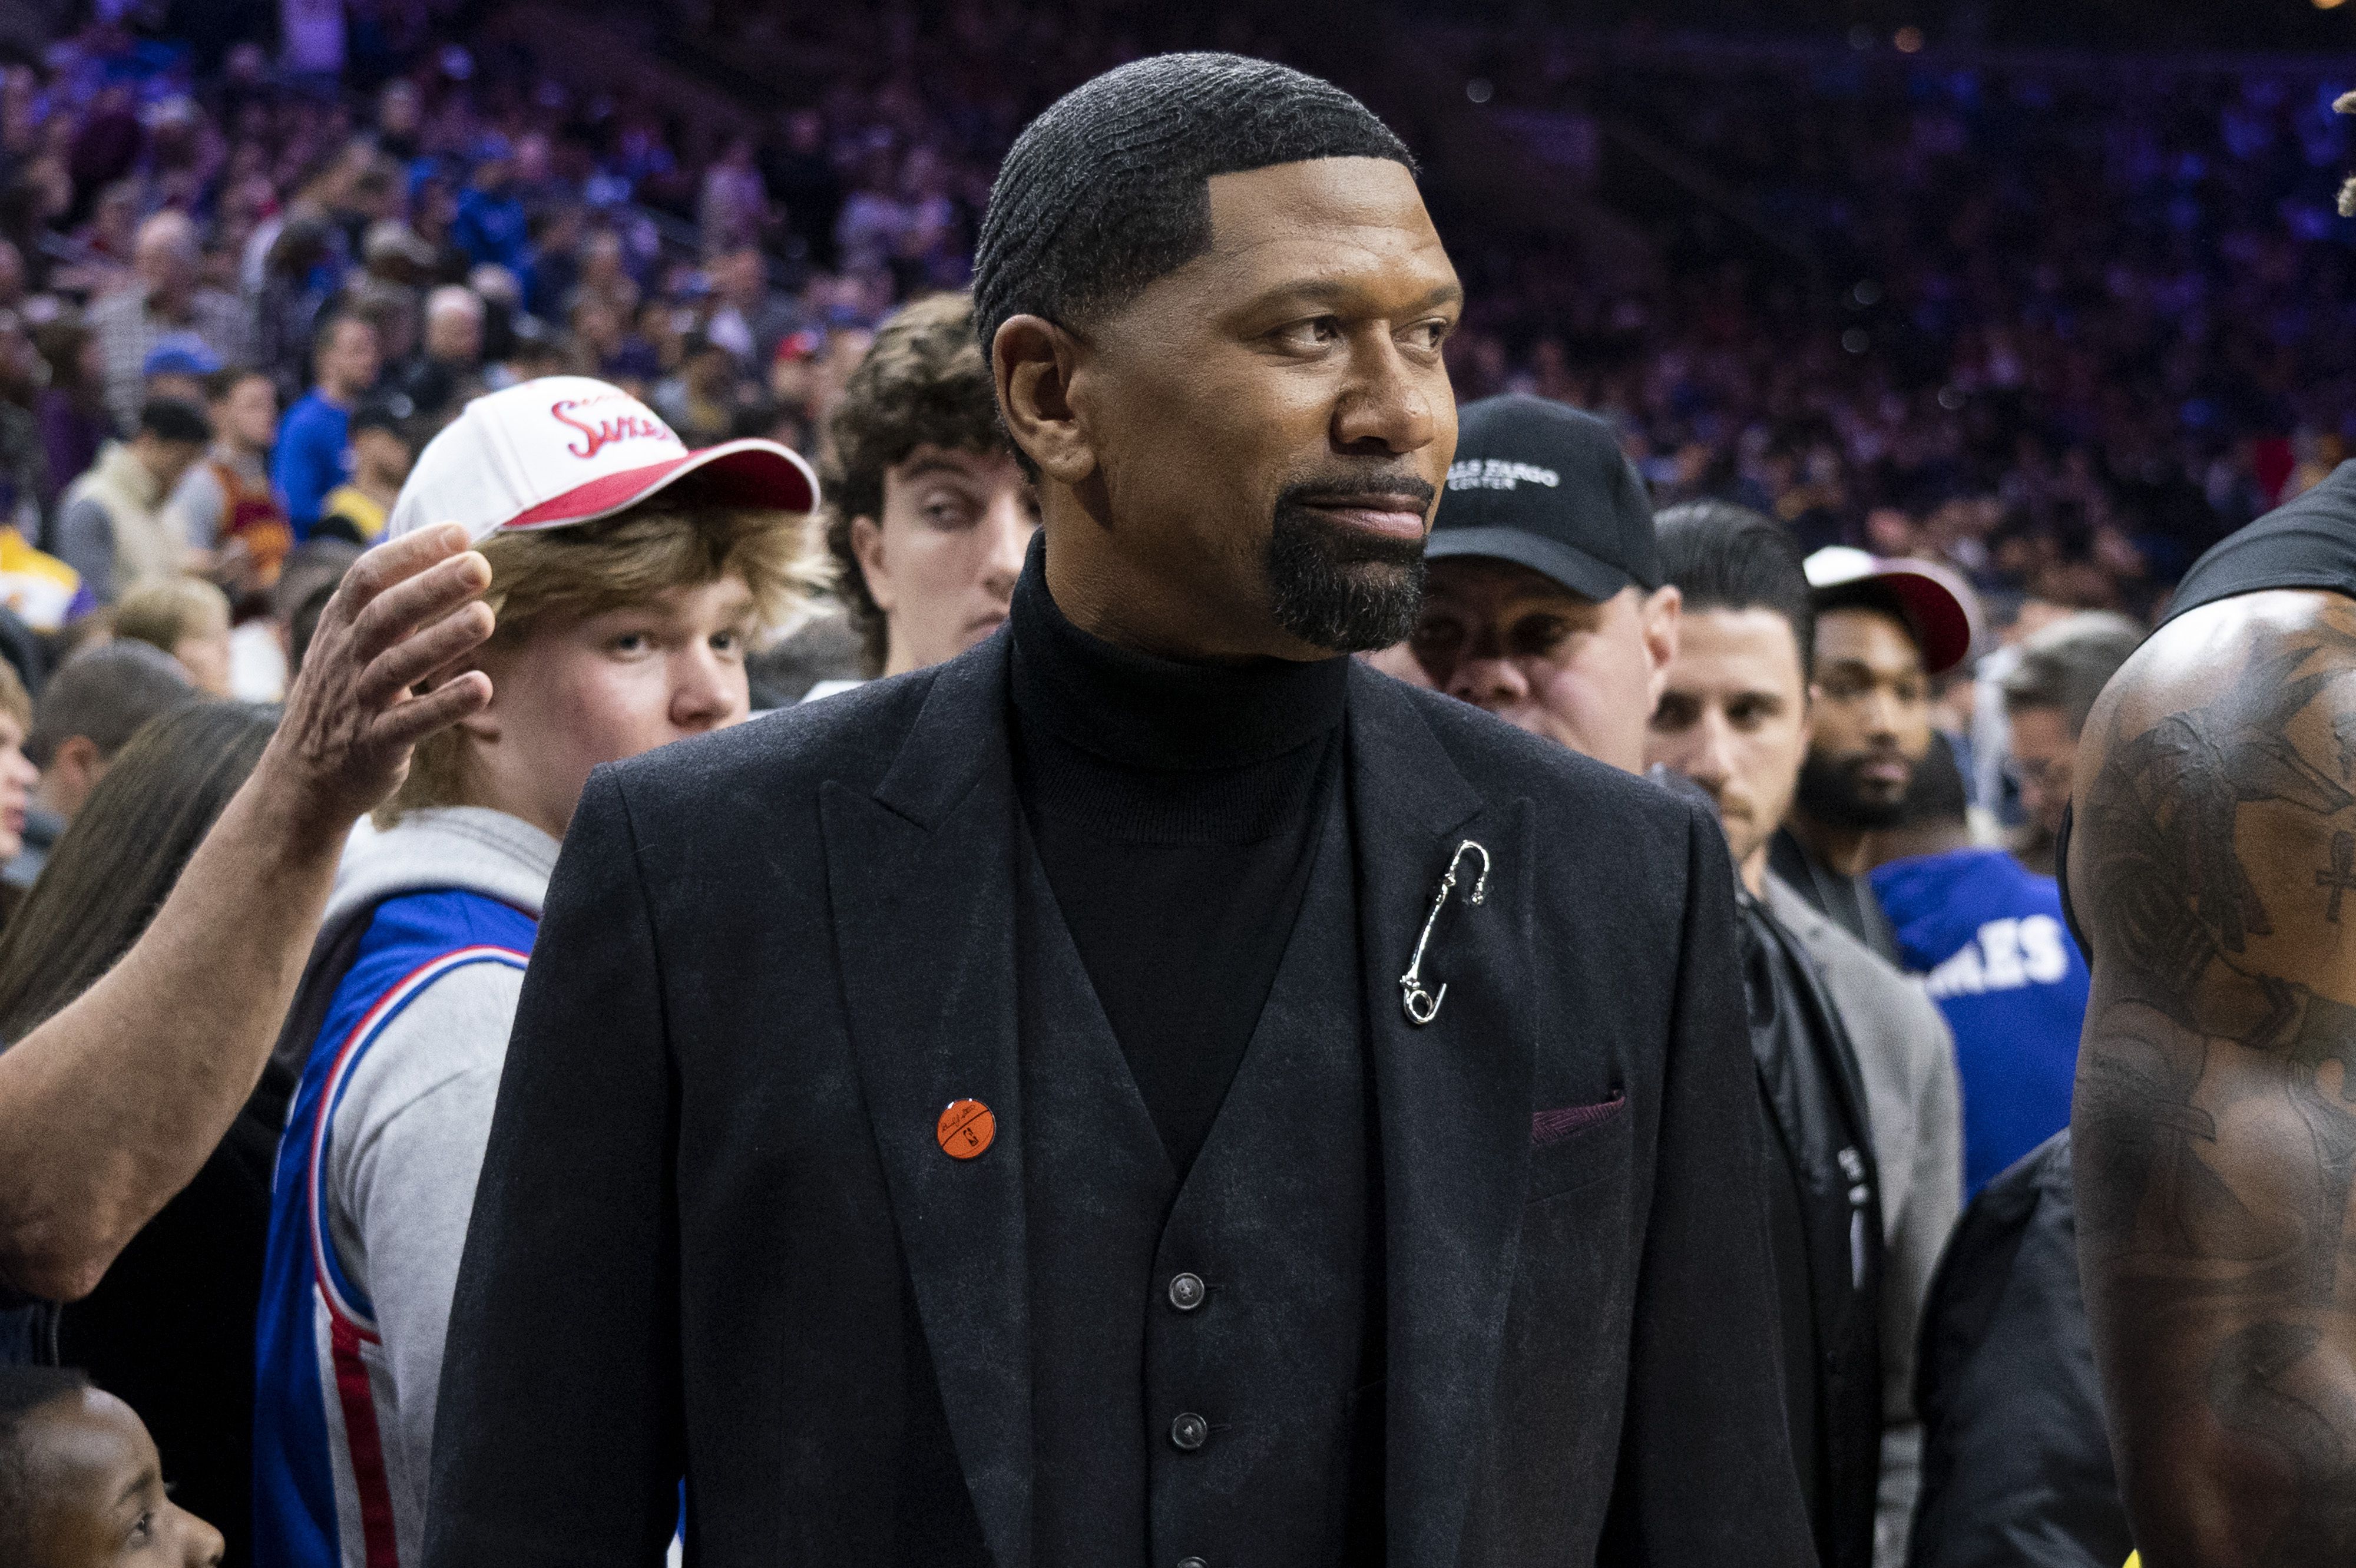 Jalen Rose Q&A: 'I consider myself to be the hardest working [broadcaster]